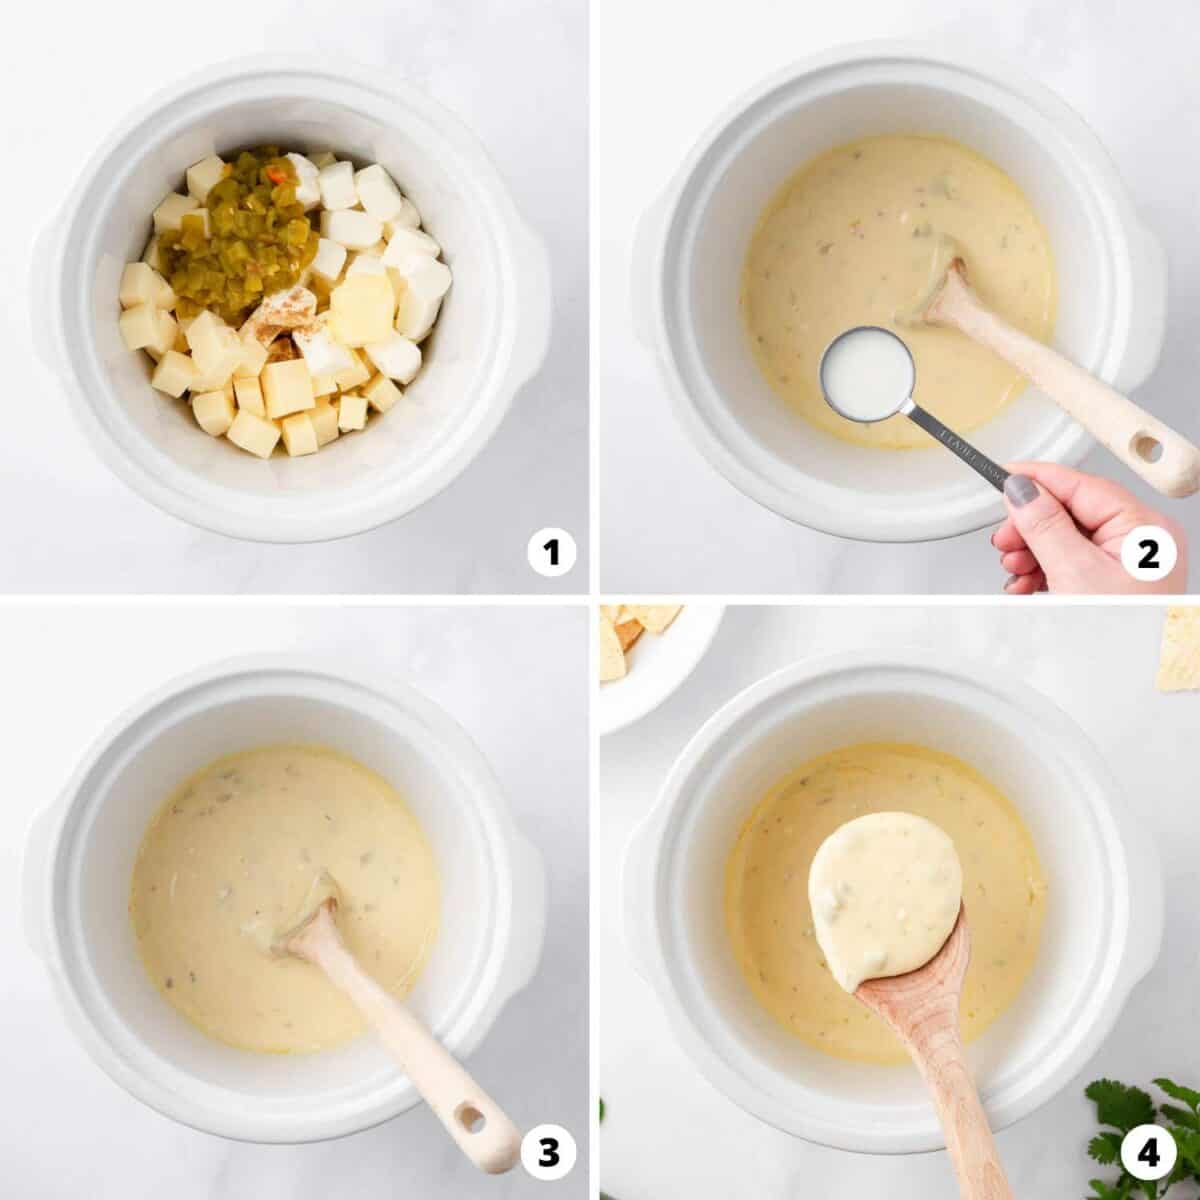 Showing how to make queso blanco in a 4 step collage.